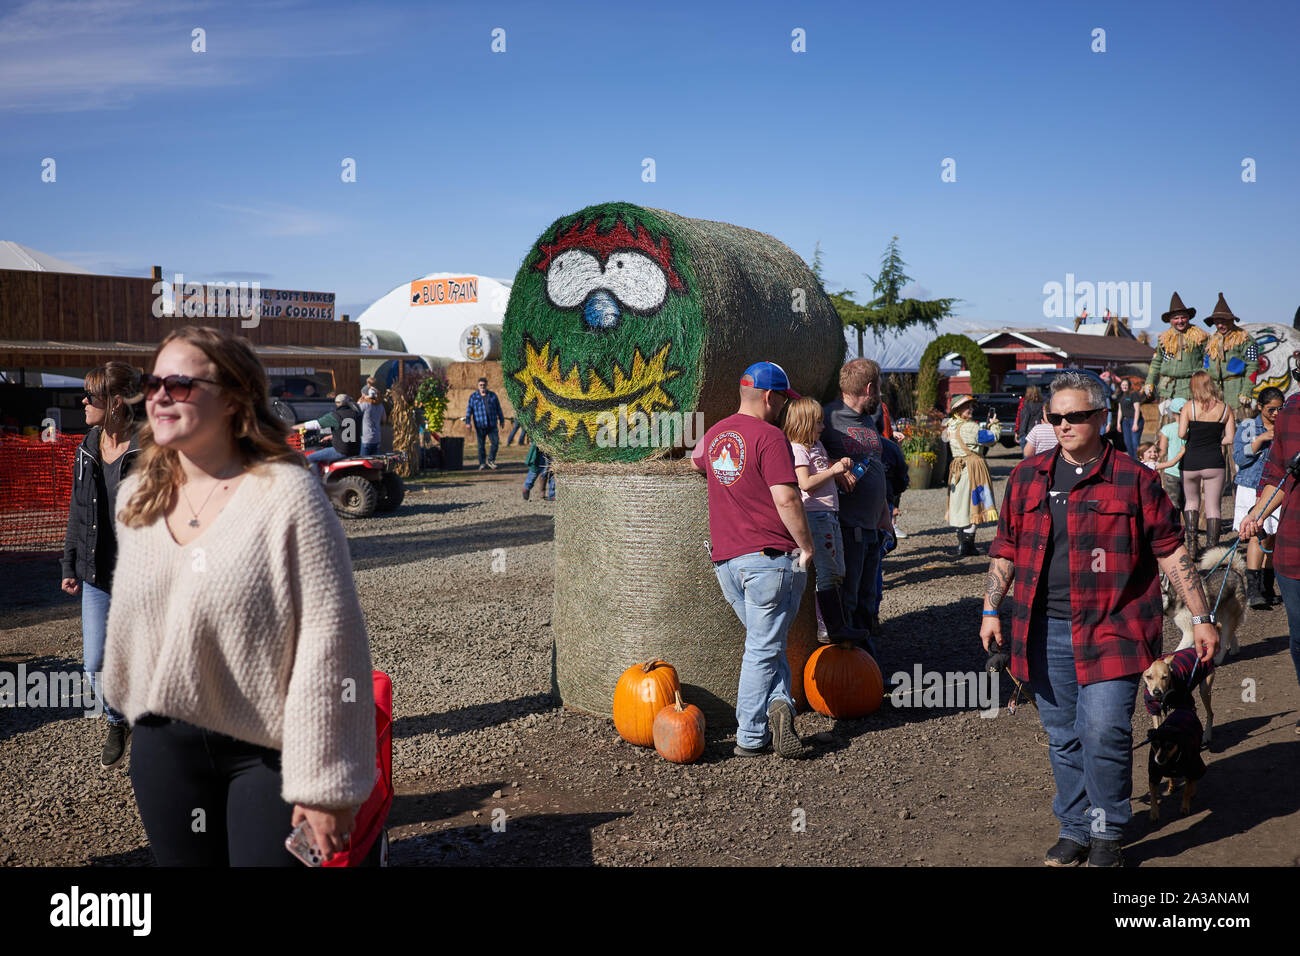 Pumpkin patch and autumn harvest festival scene in Bauman's Farm in Gervais, Oregon, seen on Saturday, Oct 5, 2019. Stock Photo